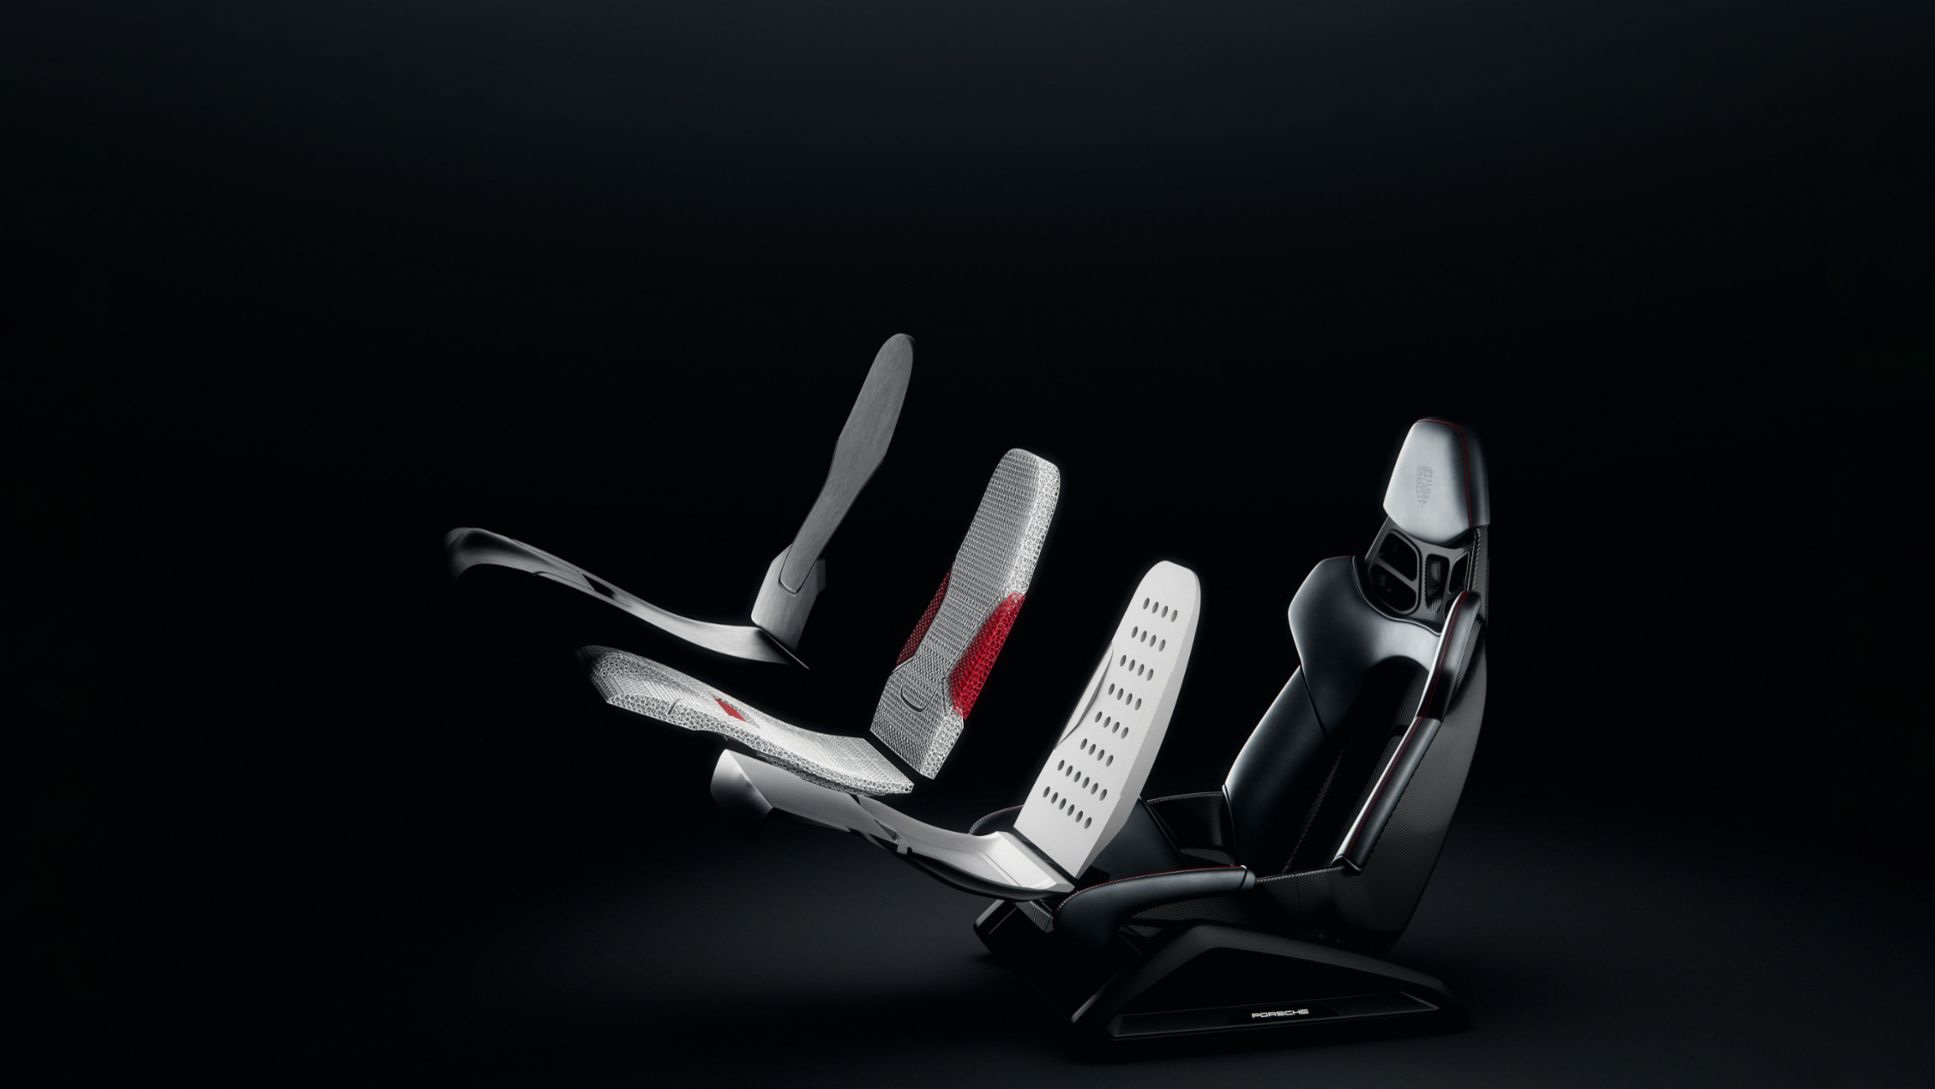 The Porsche 3D printed bodyform bucket seat is shown in its four main components.